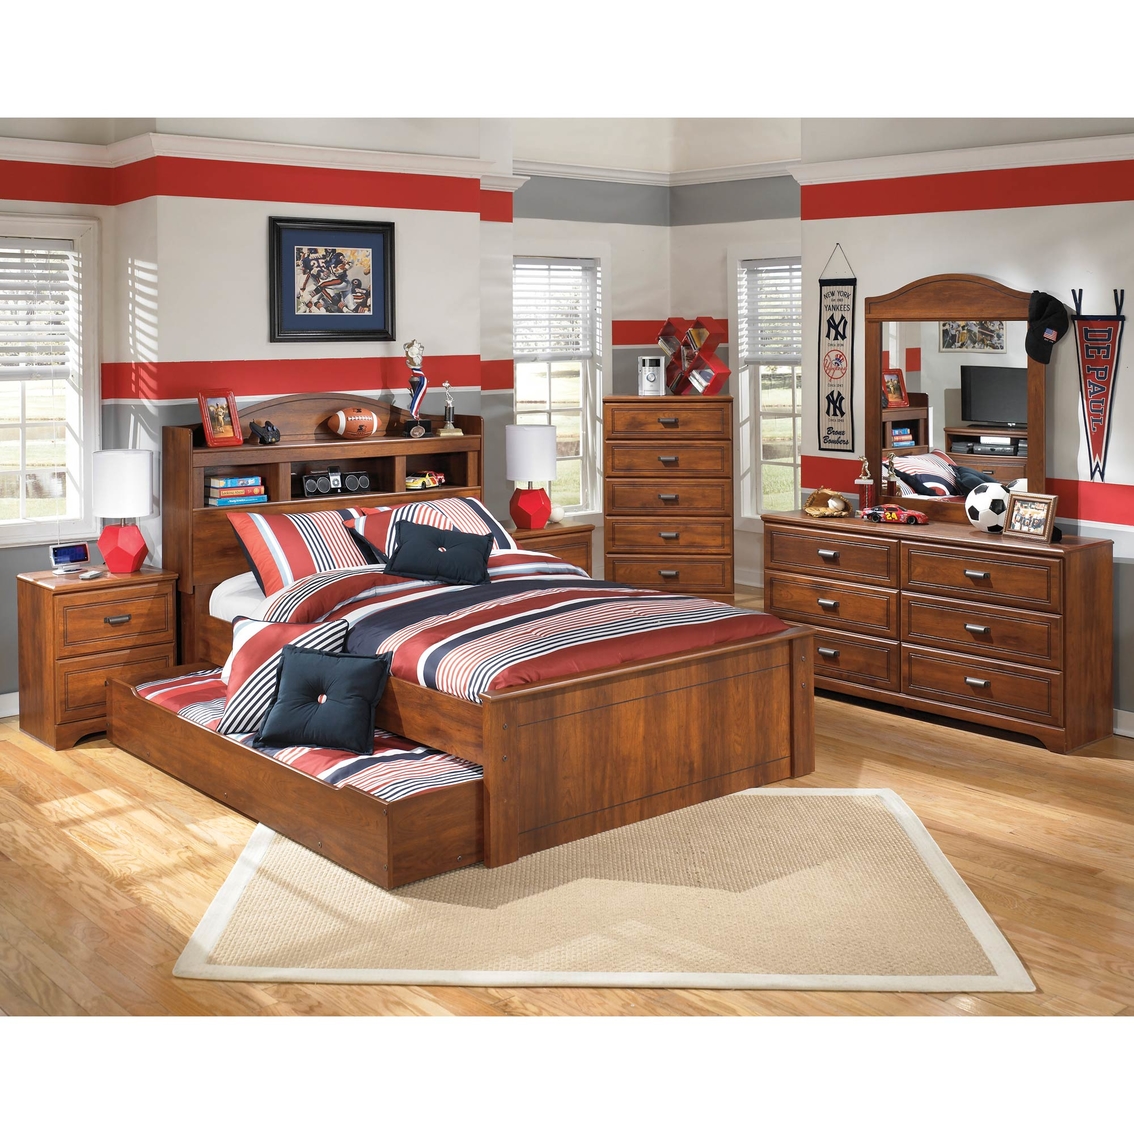 Ashley Barchan Captains with Bookcase Headboard Bed - Image 4 of 4